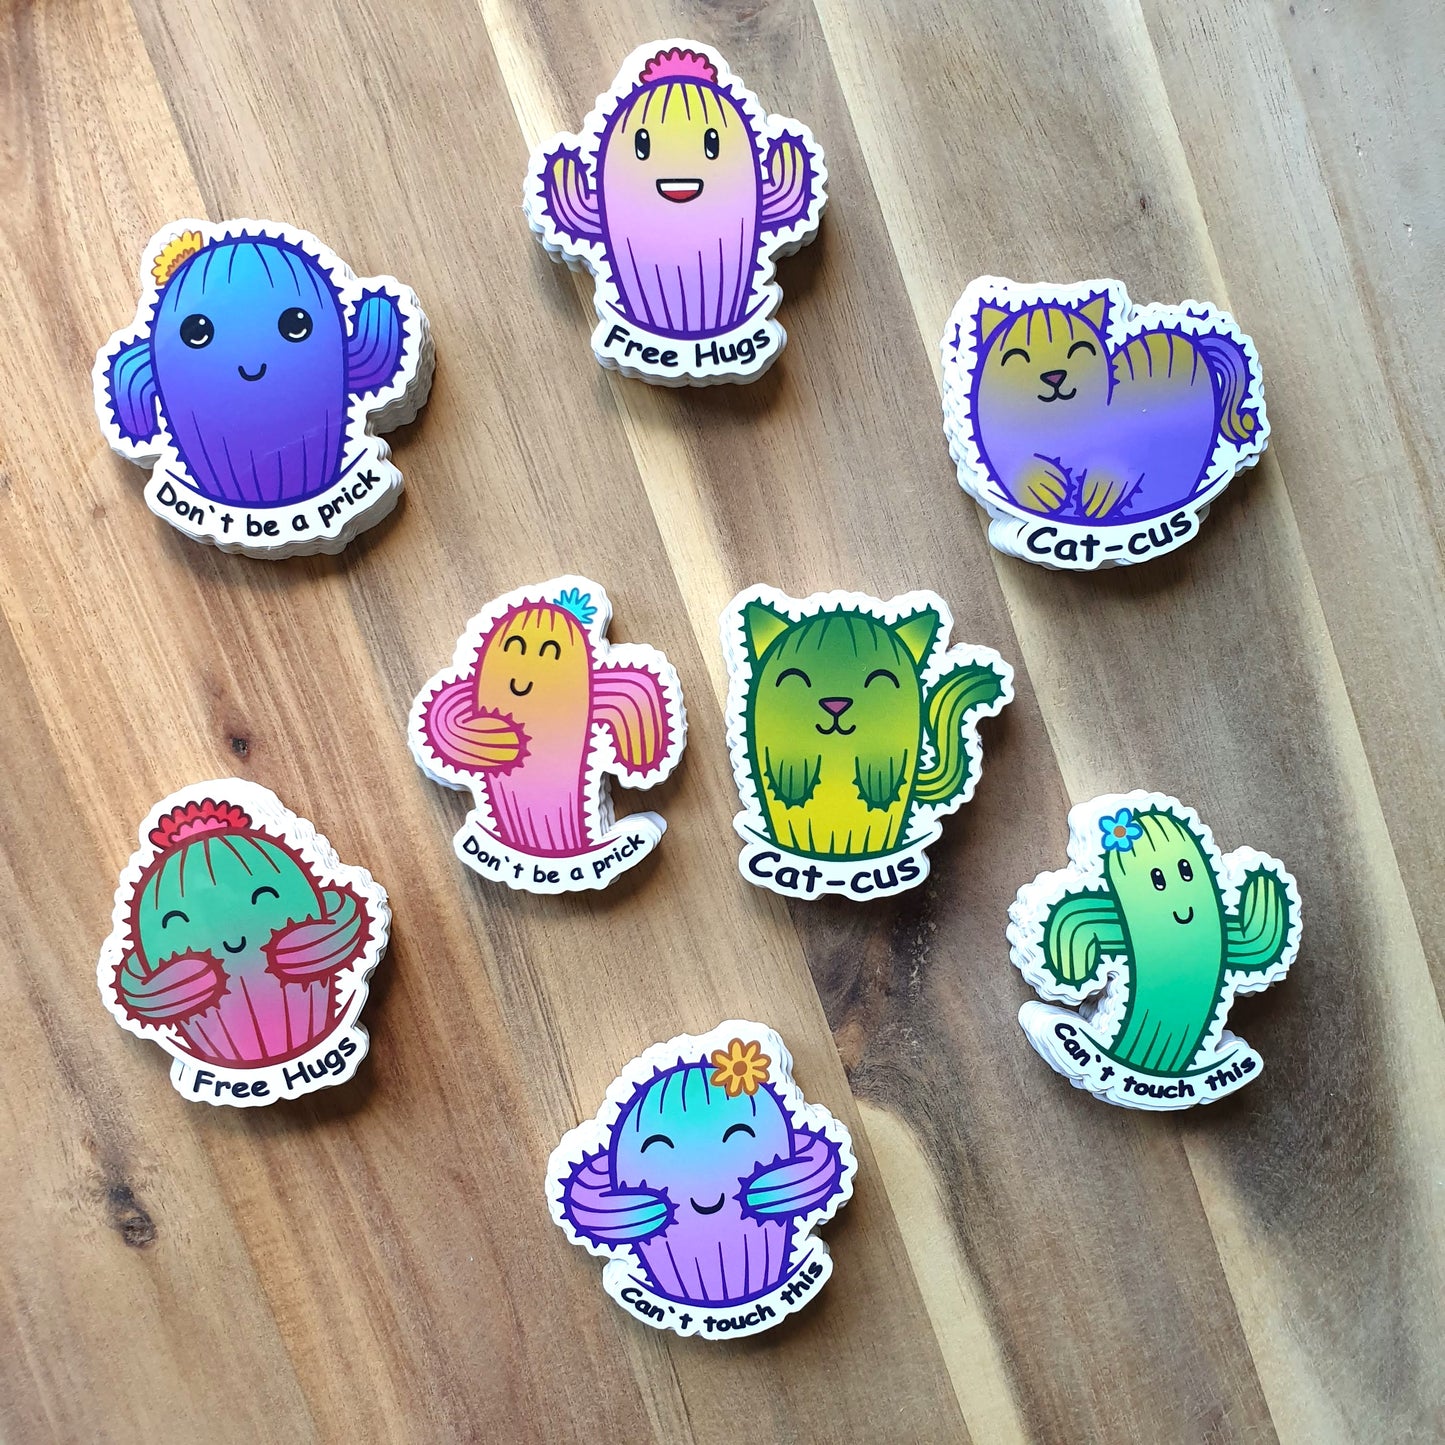 Cactus Sticker - "Can't touch this" - blue and purple